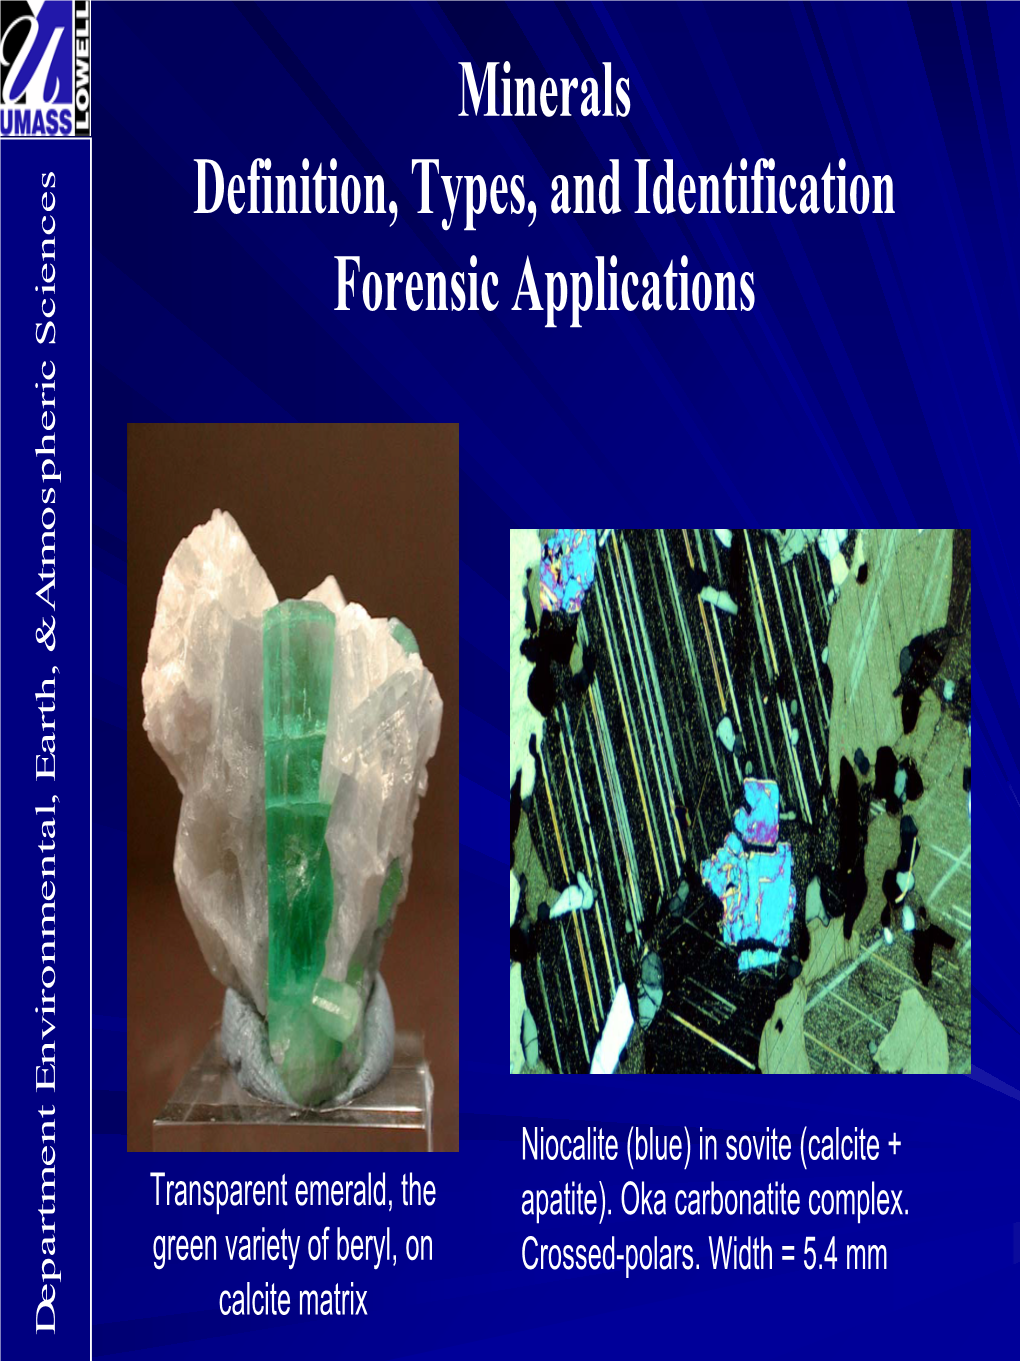 Minerals Definition, Types, and Identification Forensic Applications